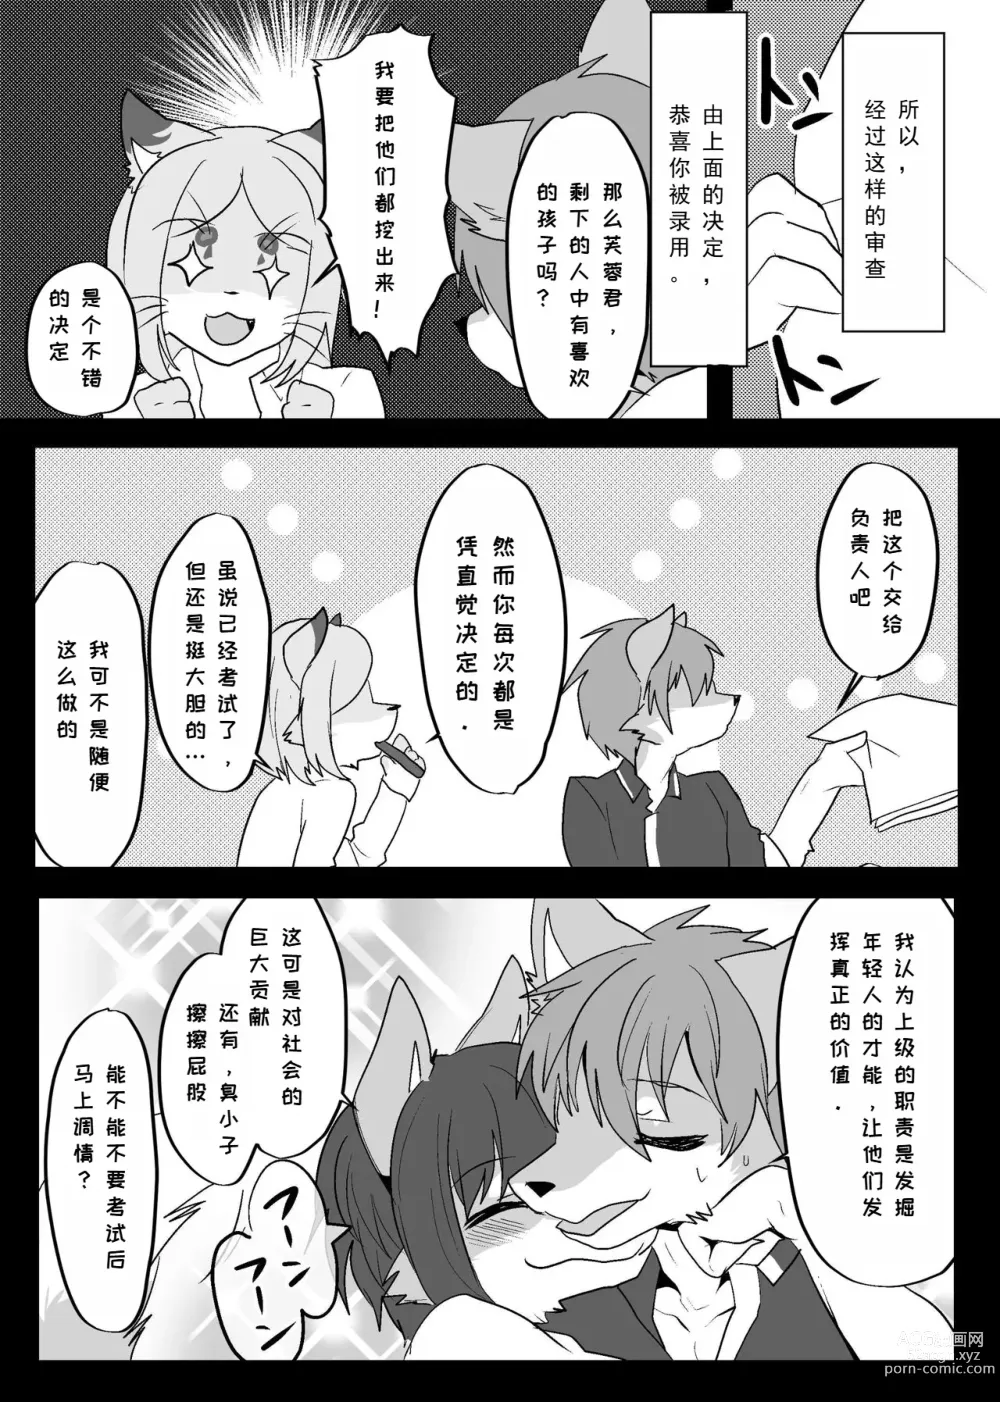 Page 5 of doujinshi 我们发情出勤科 2